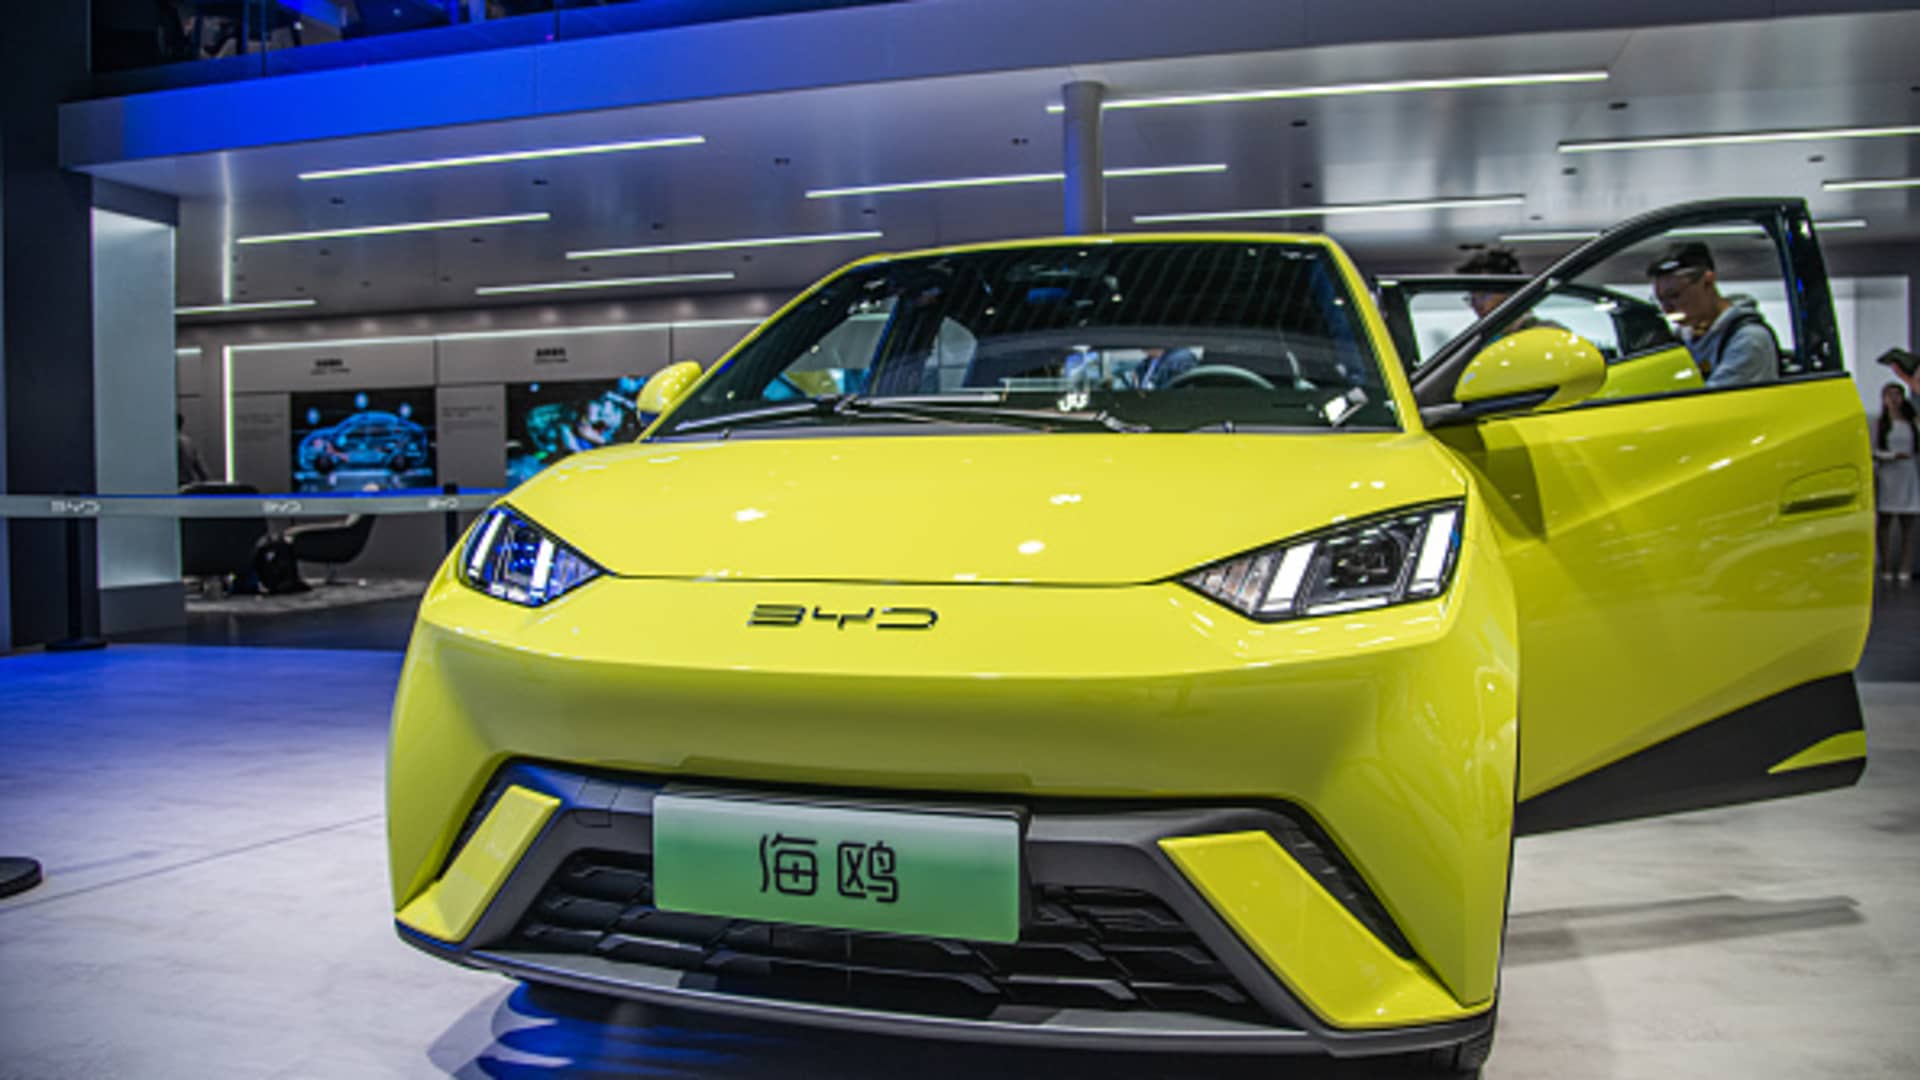 A BYD Seagull small electric car is on display during the 20th Shanghai International Automobile Industry Exhibition at the National Exhibition and Convention Center (Shanghai)